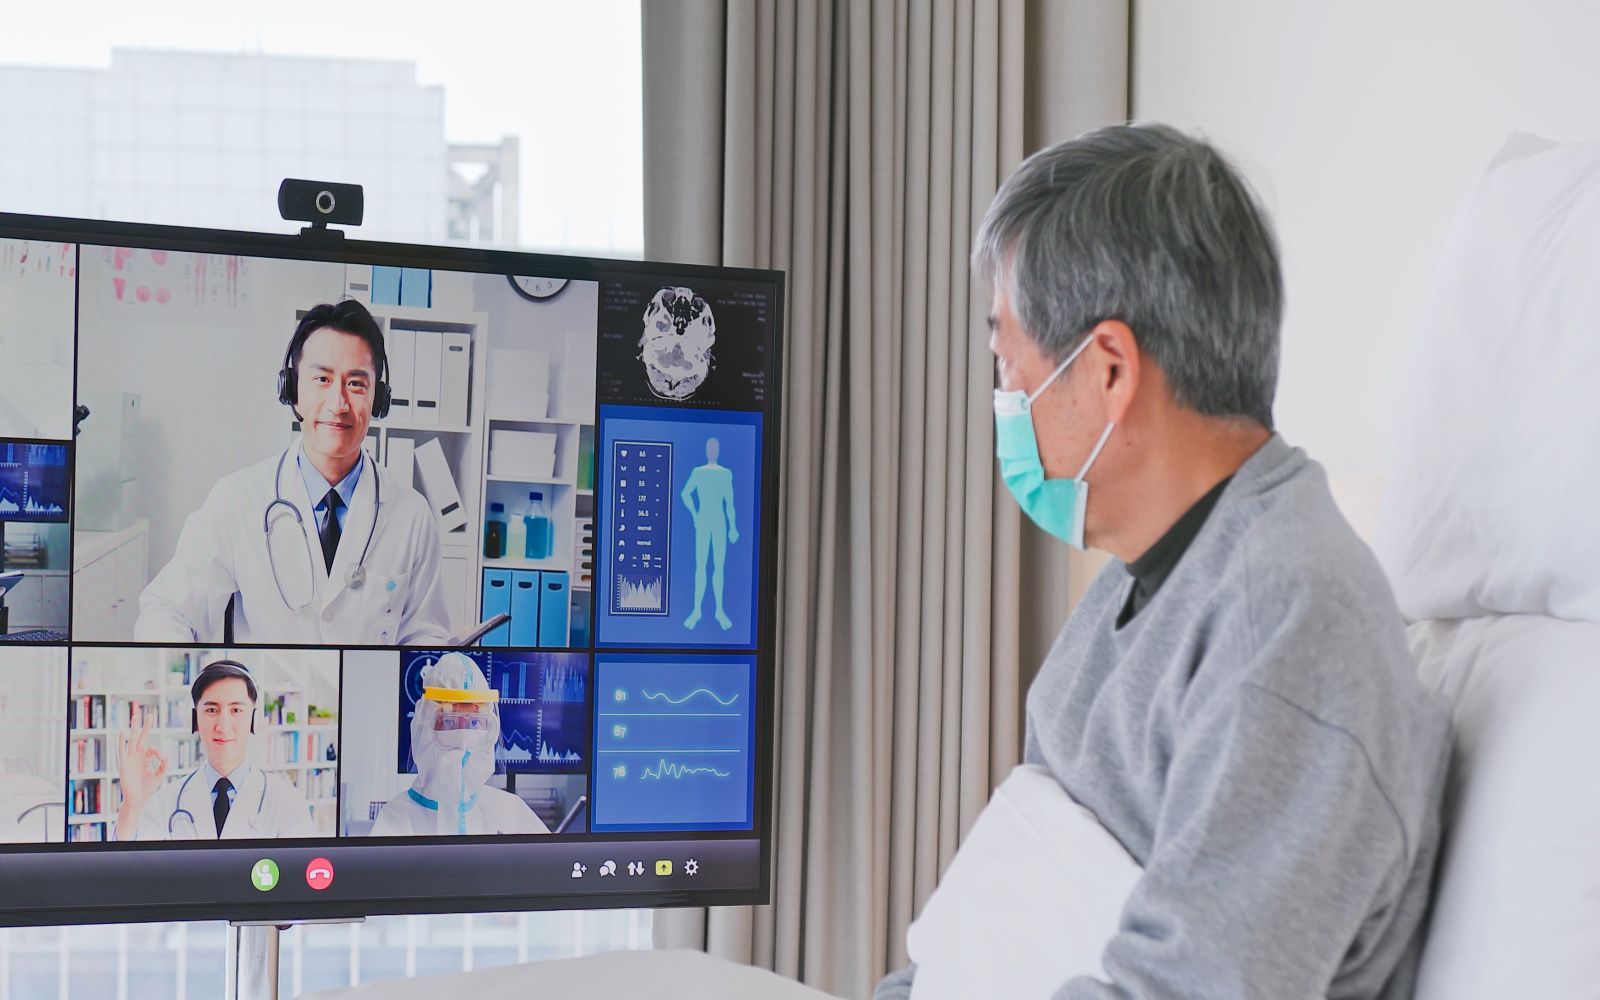 7 Ways to Use Real-time Video in Telehealth￼